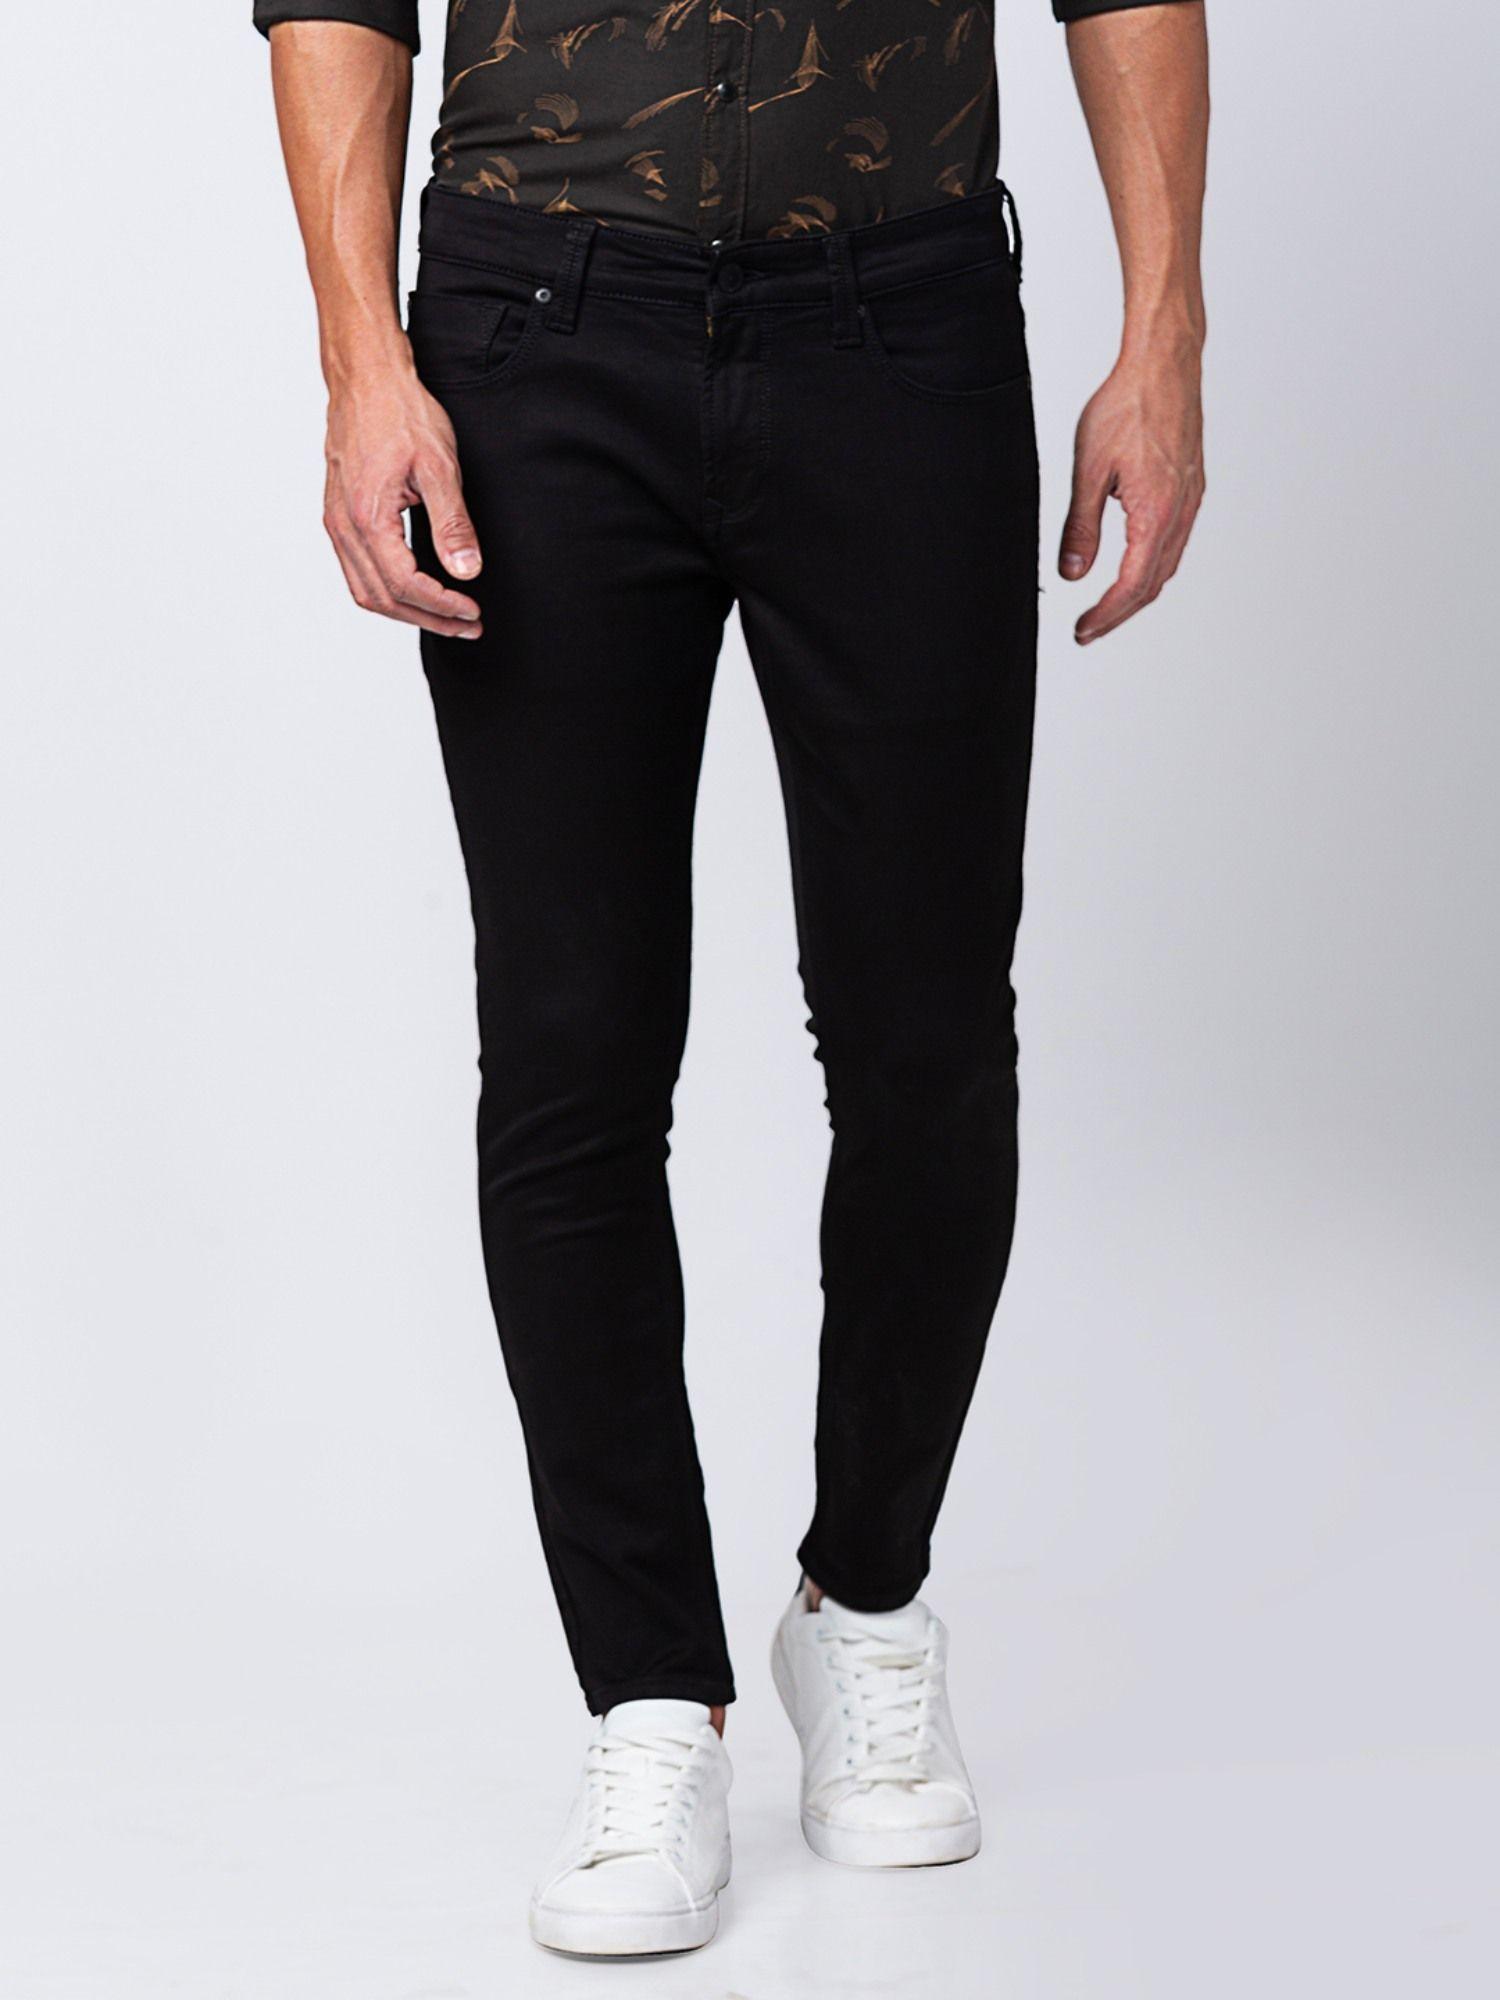 black-mid-rise-tapered-fit-jeans-for-men